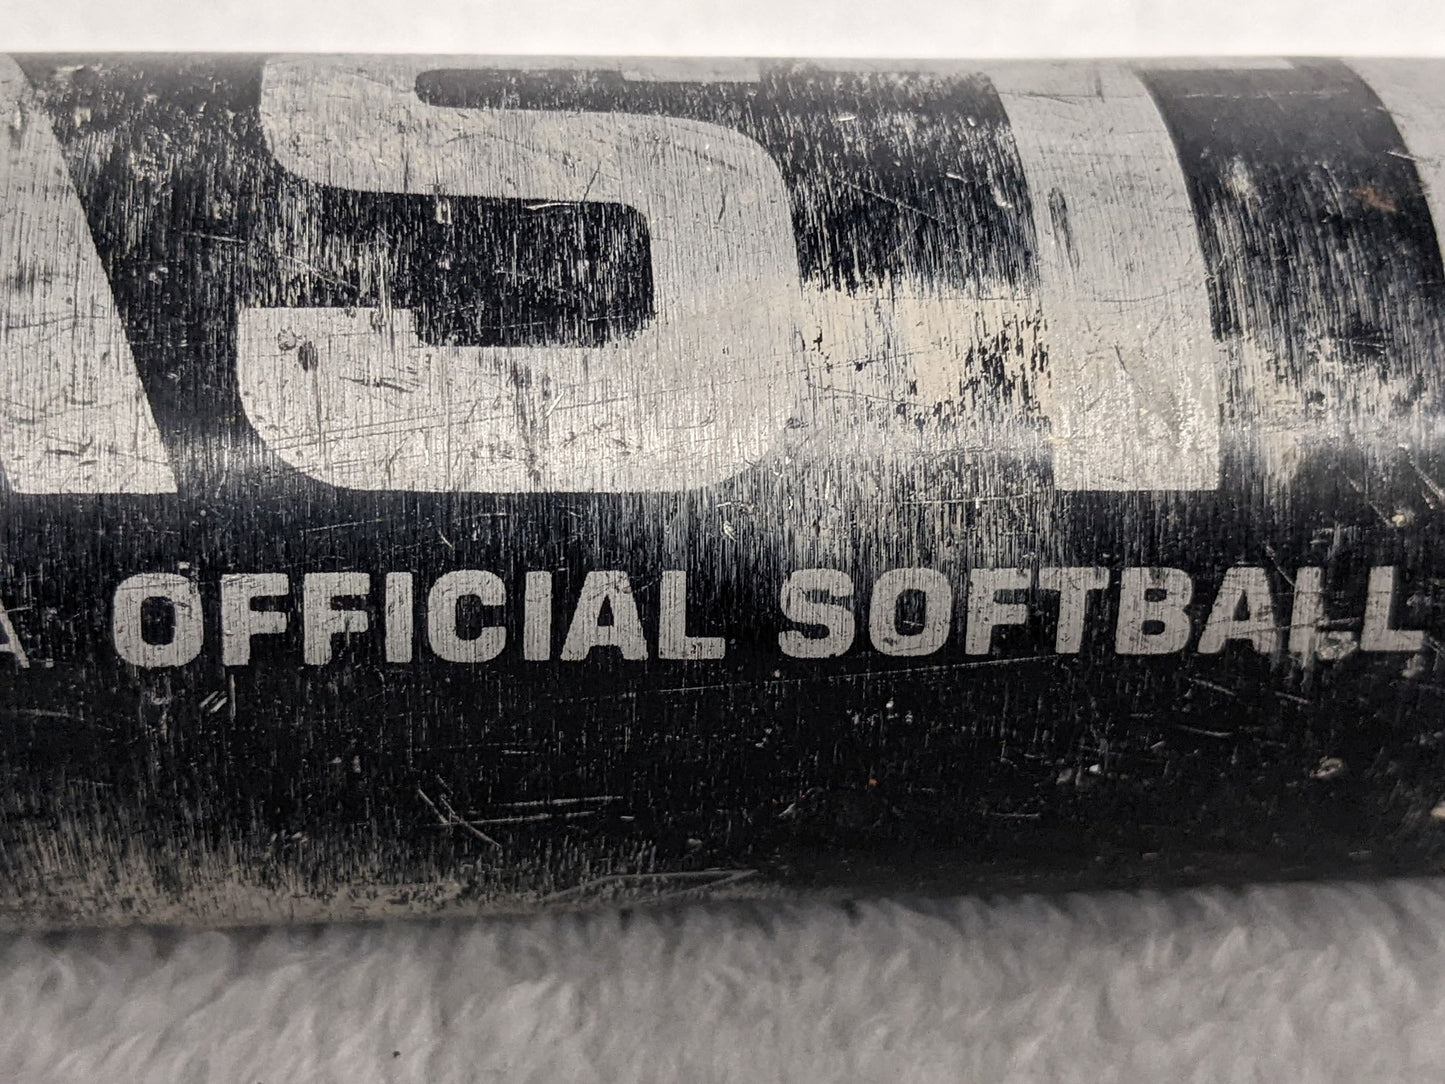 Easton Hammer Softball Bat Size 33 In 24 Oz Color Black Condition Used